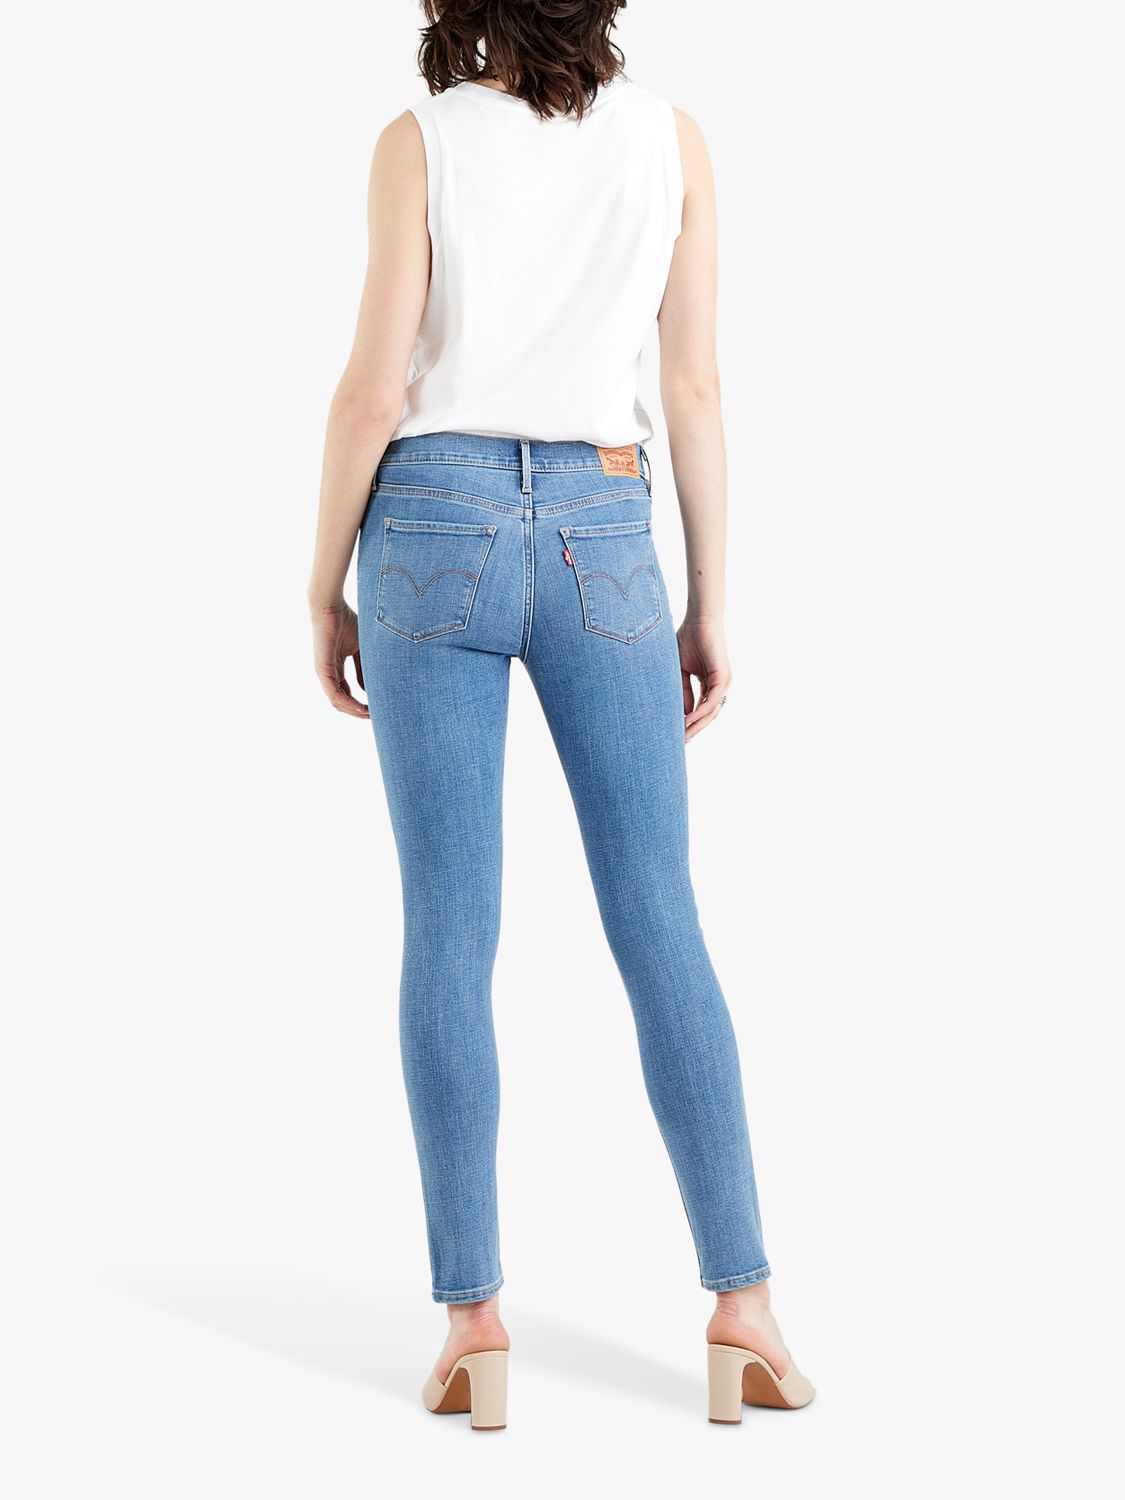 Levi's 311 Shaping Skinny Jeans, Slate Will at John Lewis & Partners